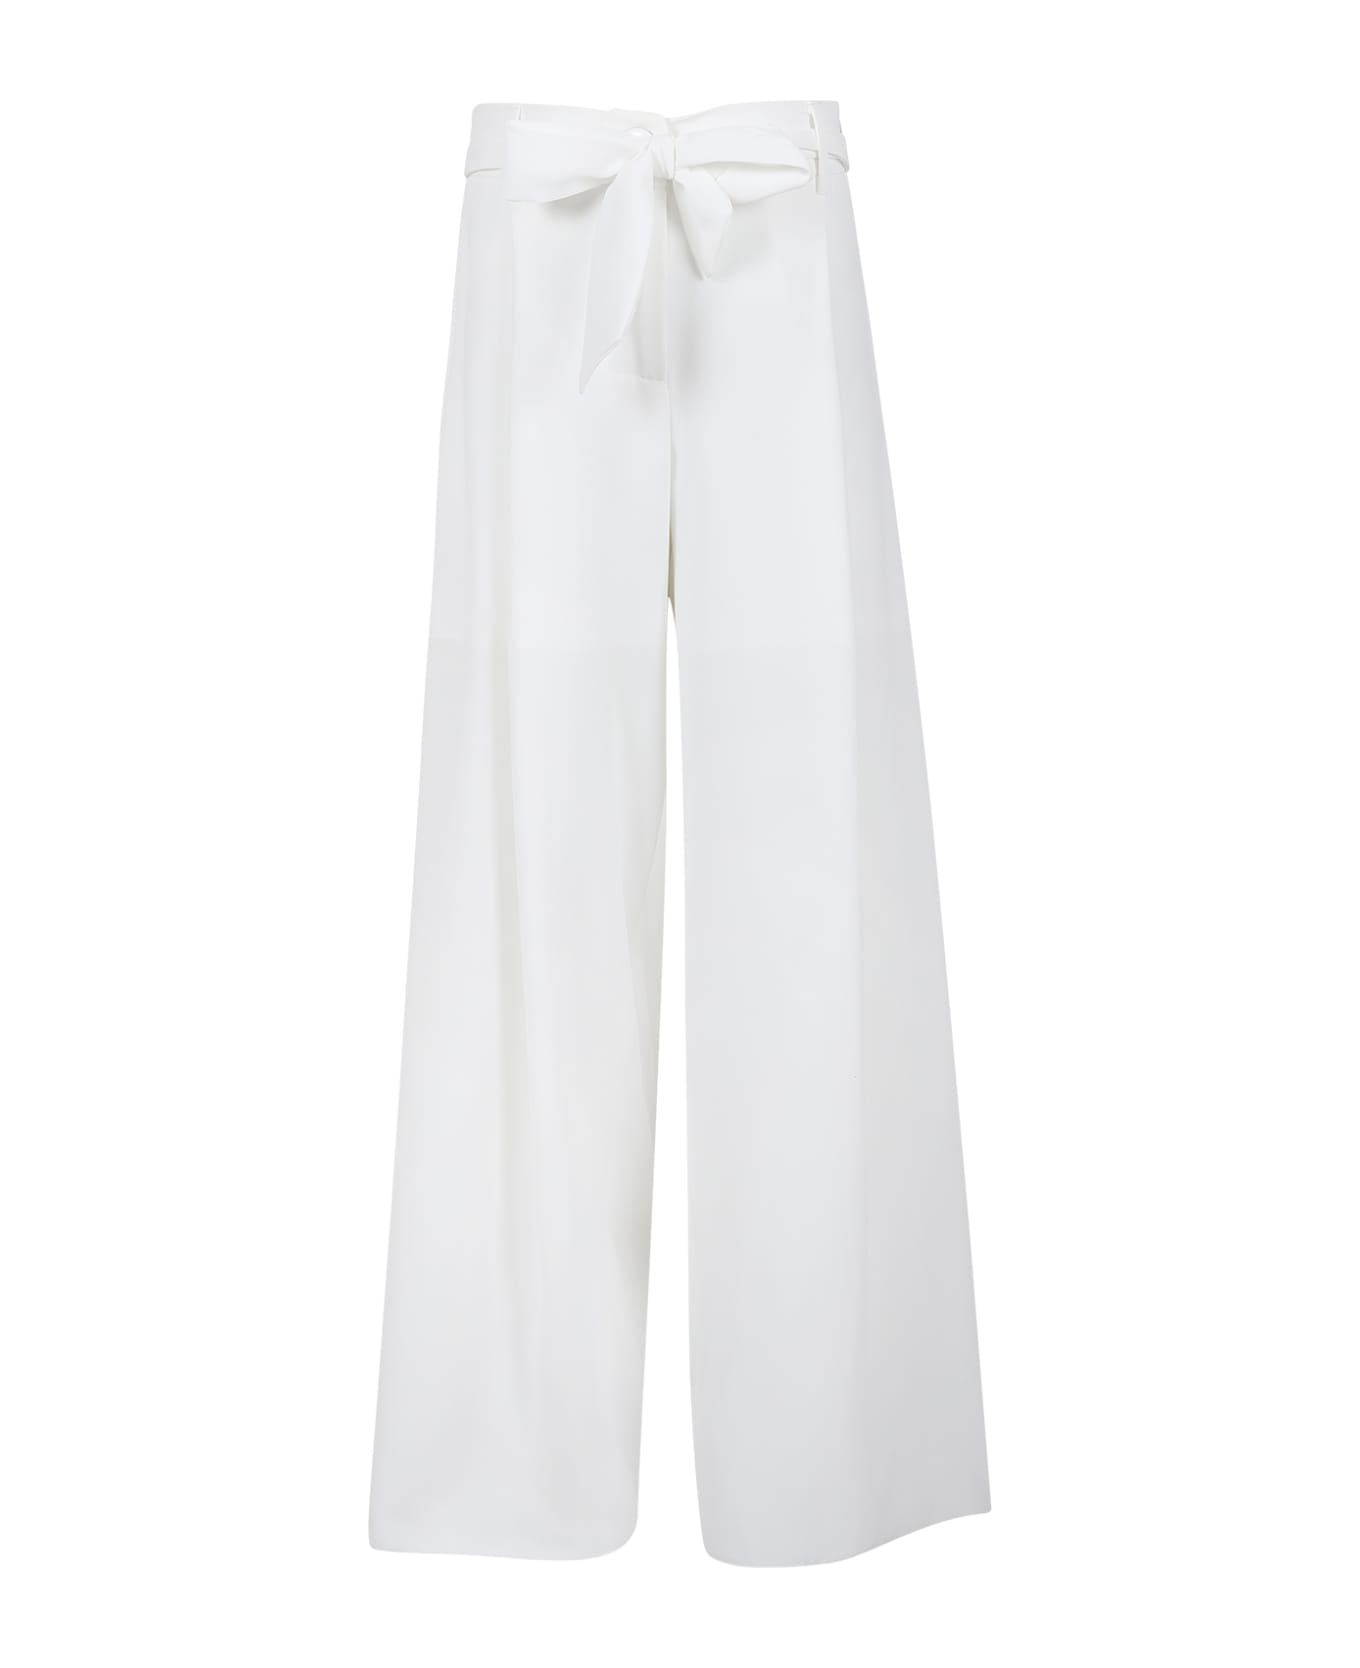 Monnalisa White Trousers For Girl With Bow Belt - Panna ボトムス